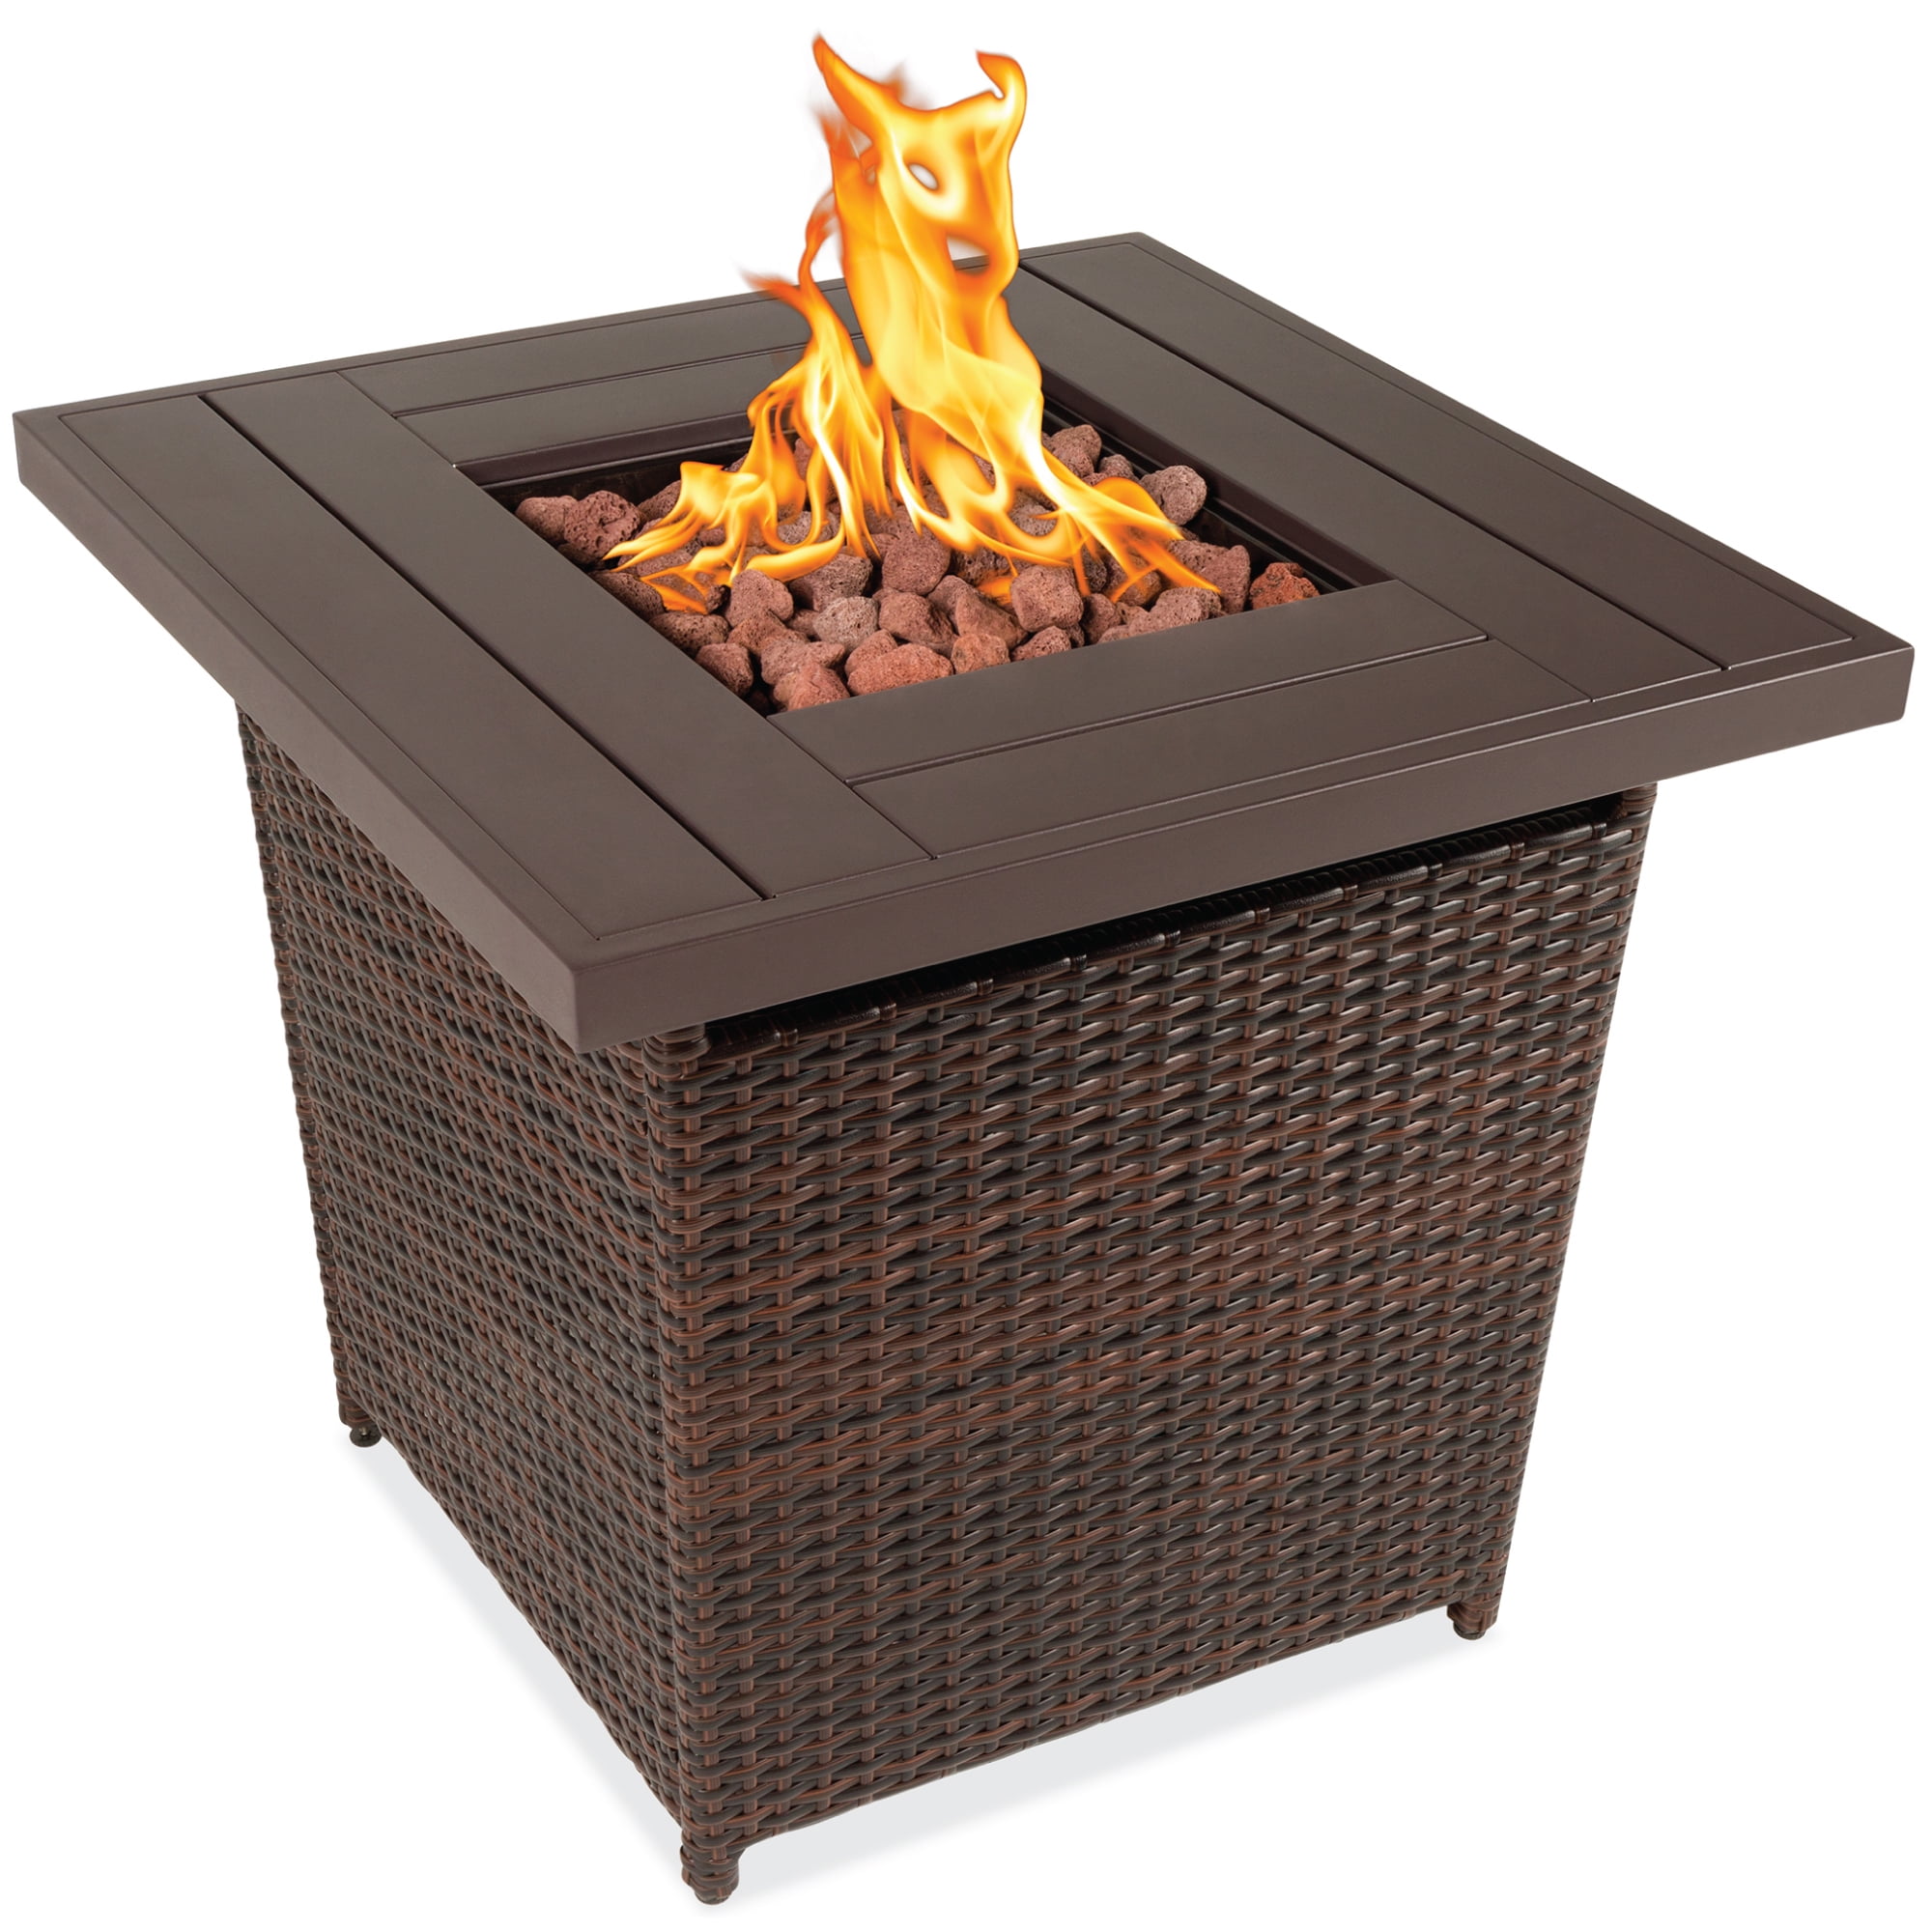 Best Choice Products 28in Fire Pit Table 50,000 BTU Outdoor Wicker Patio w/ Lava Rocks, Cover, Tank Holder Brown